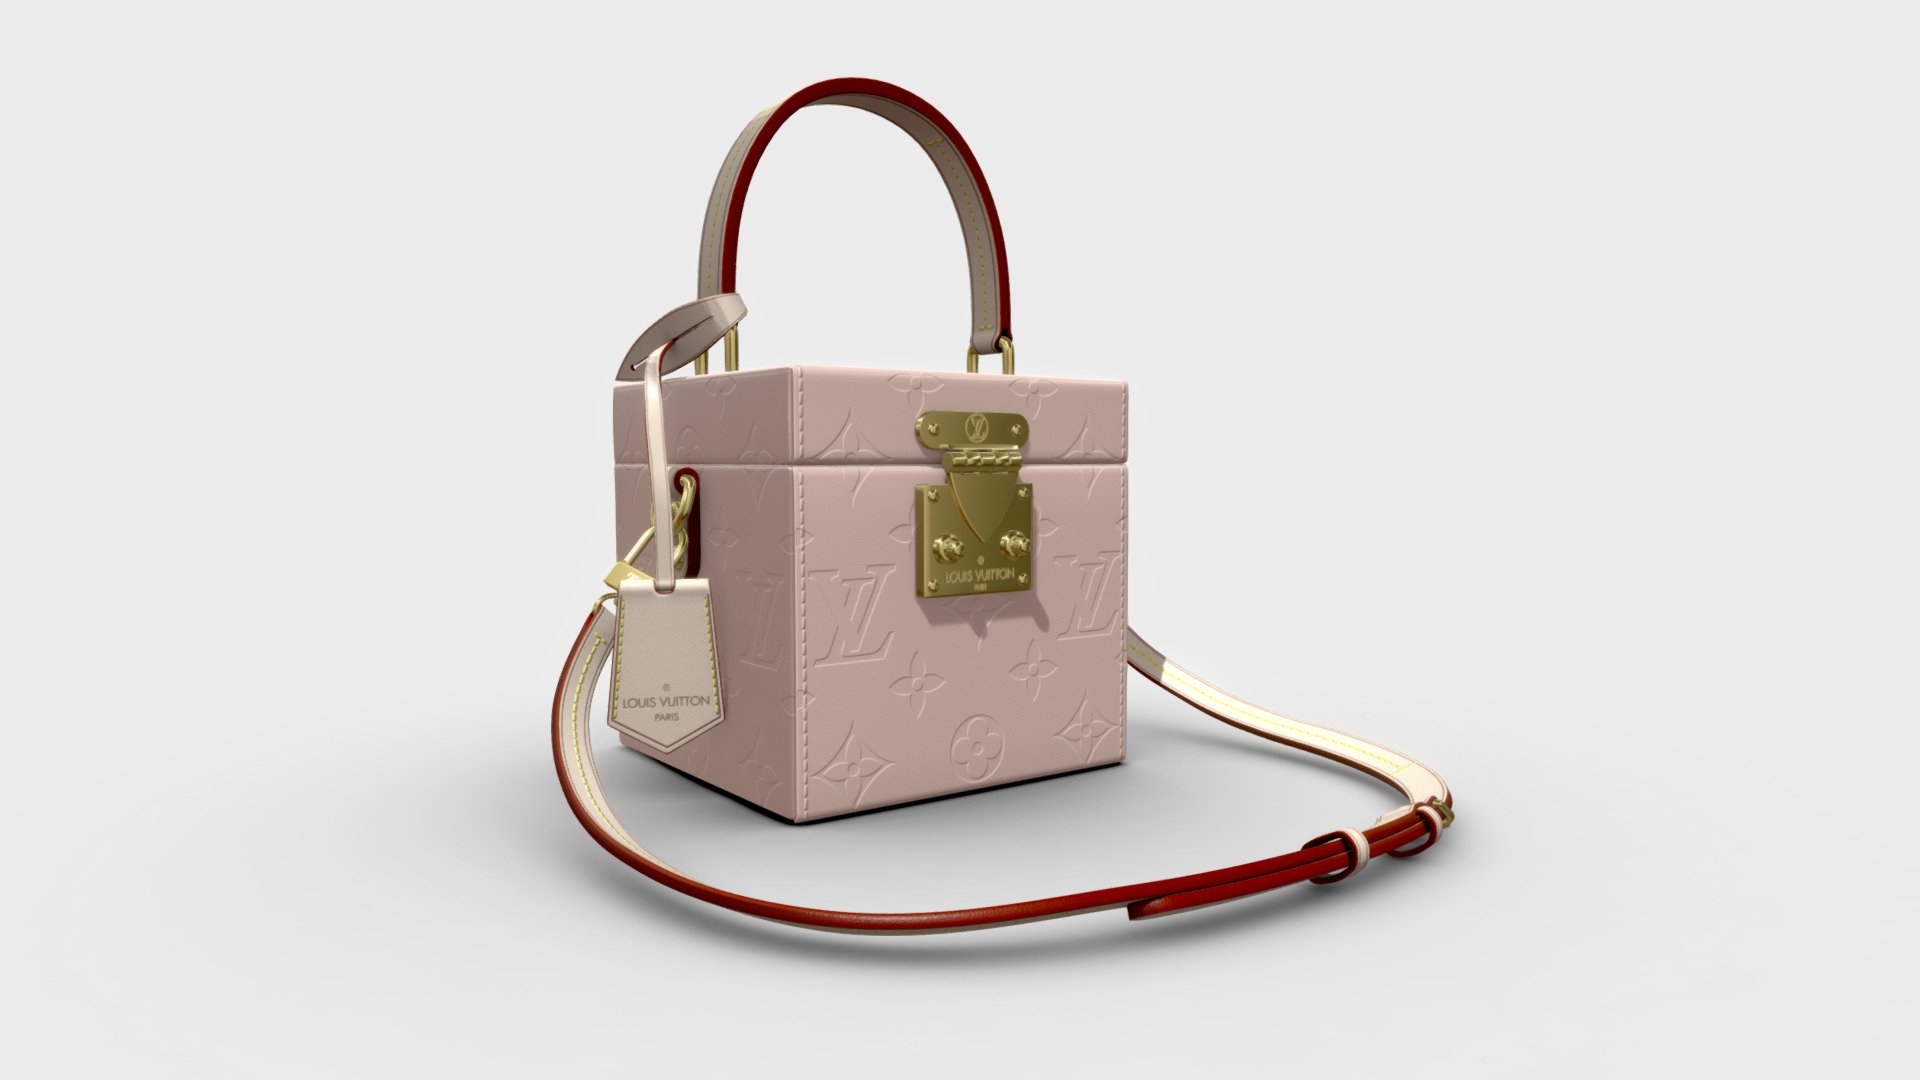 Louis Vuitton Bleecker Box
The file includes a 3D model and 4k PBR textures in png format, Obj and Fbx files.

The model was created in 3ds max 2023 with the render engine V-Ray 5.0

Blender 3.5 file is included.

You can request a different format.

Textures

PBR textures 4096x4096 pixels

each material contains




BasicColor.

AO.

Roughness.

Normal.

Metalness.

Opacity.

Note: This model is not for 3D printing.


Please read carefully: This is a 3D model, NOT a physical object.
Have a nice day! - Louis Vuitton Bleecker Box - Buy Royalty Free 3D model by hado (@hado3d) 3d model